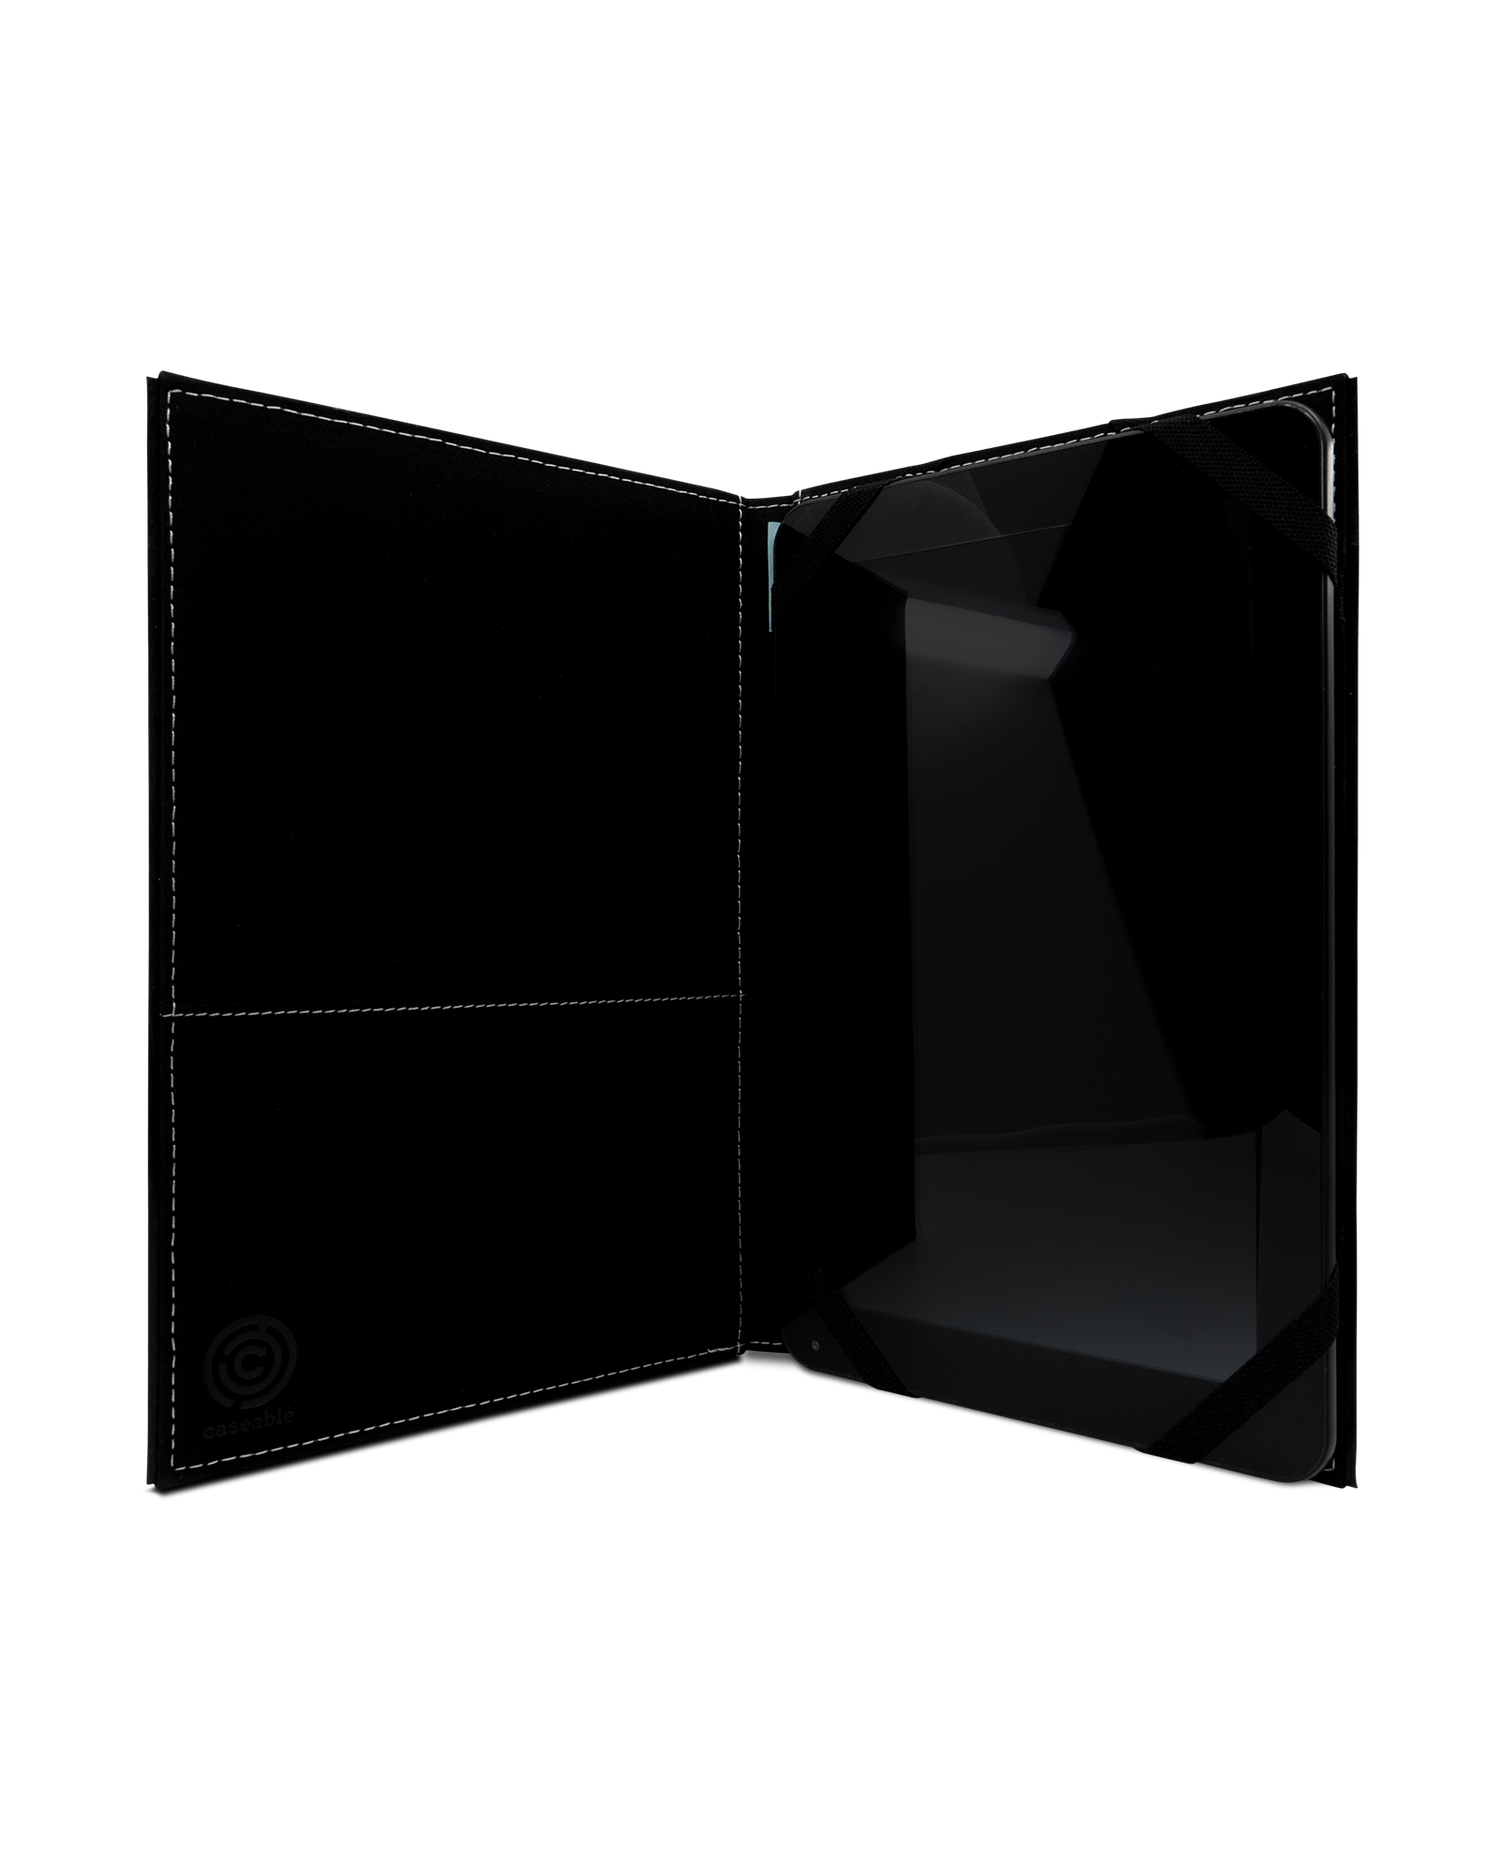 BLACK Tablet Case L: Opened interior view